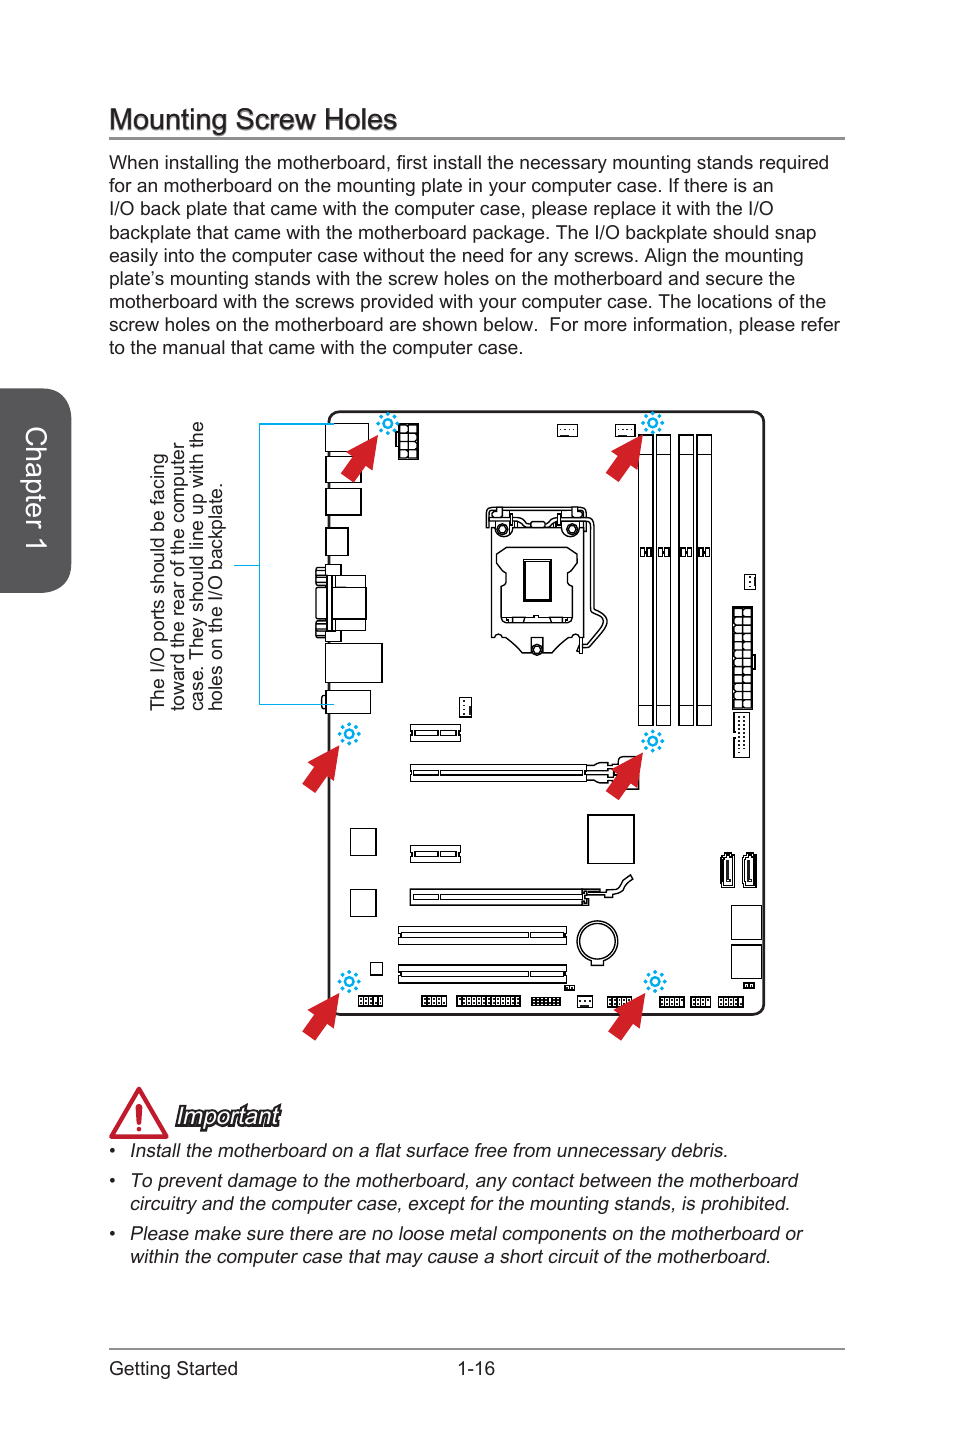 Mounting screw holes -16, Chapter 1, Mounting screw holes | MSI Z97 PC MATE  User Manual | Page 30 / 102 | Original mode